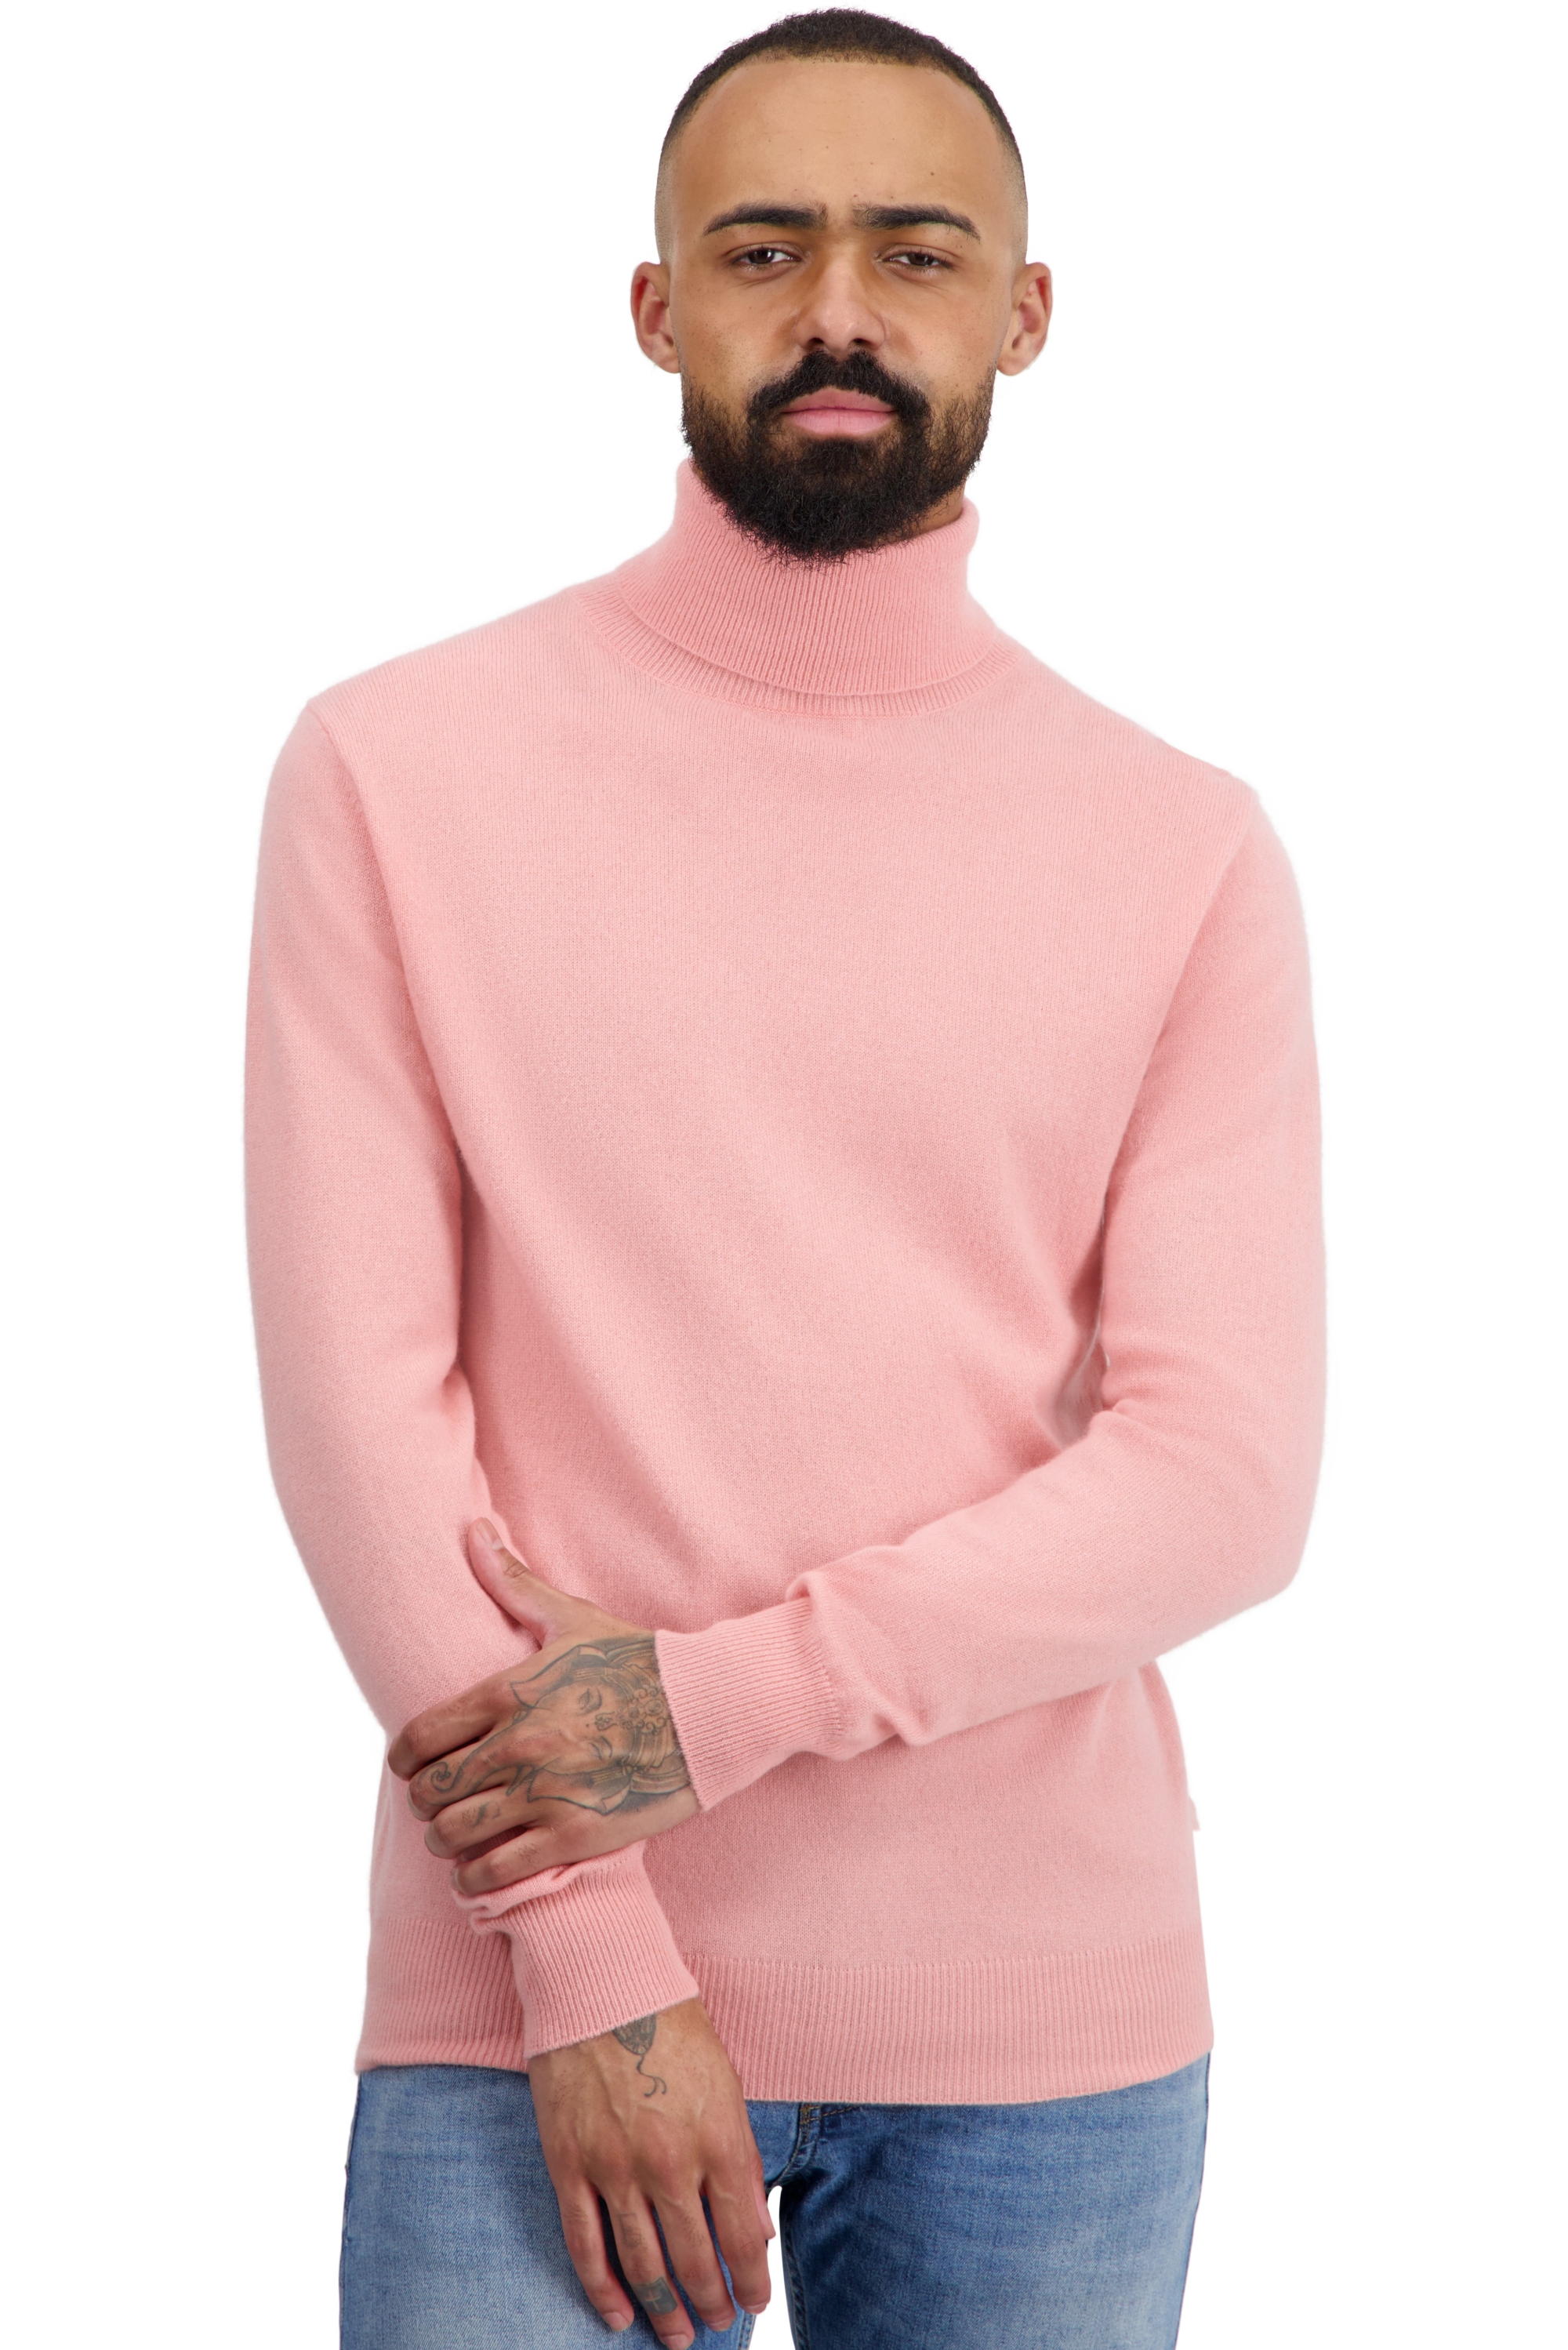 Cashmere men basic sweaters at low prices tarry first tea rose xl